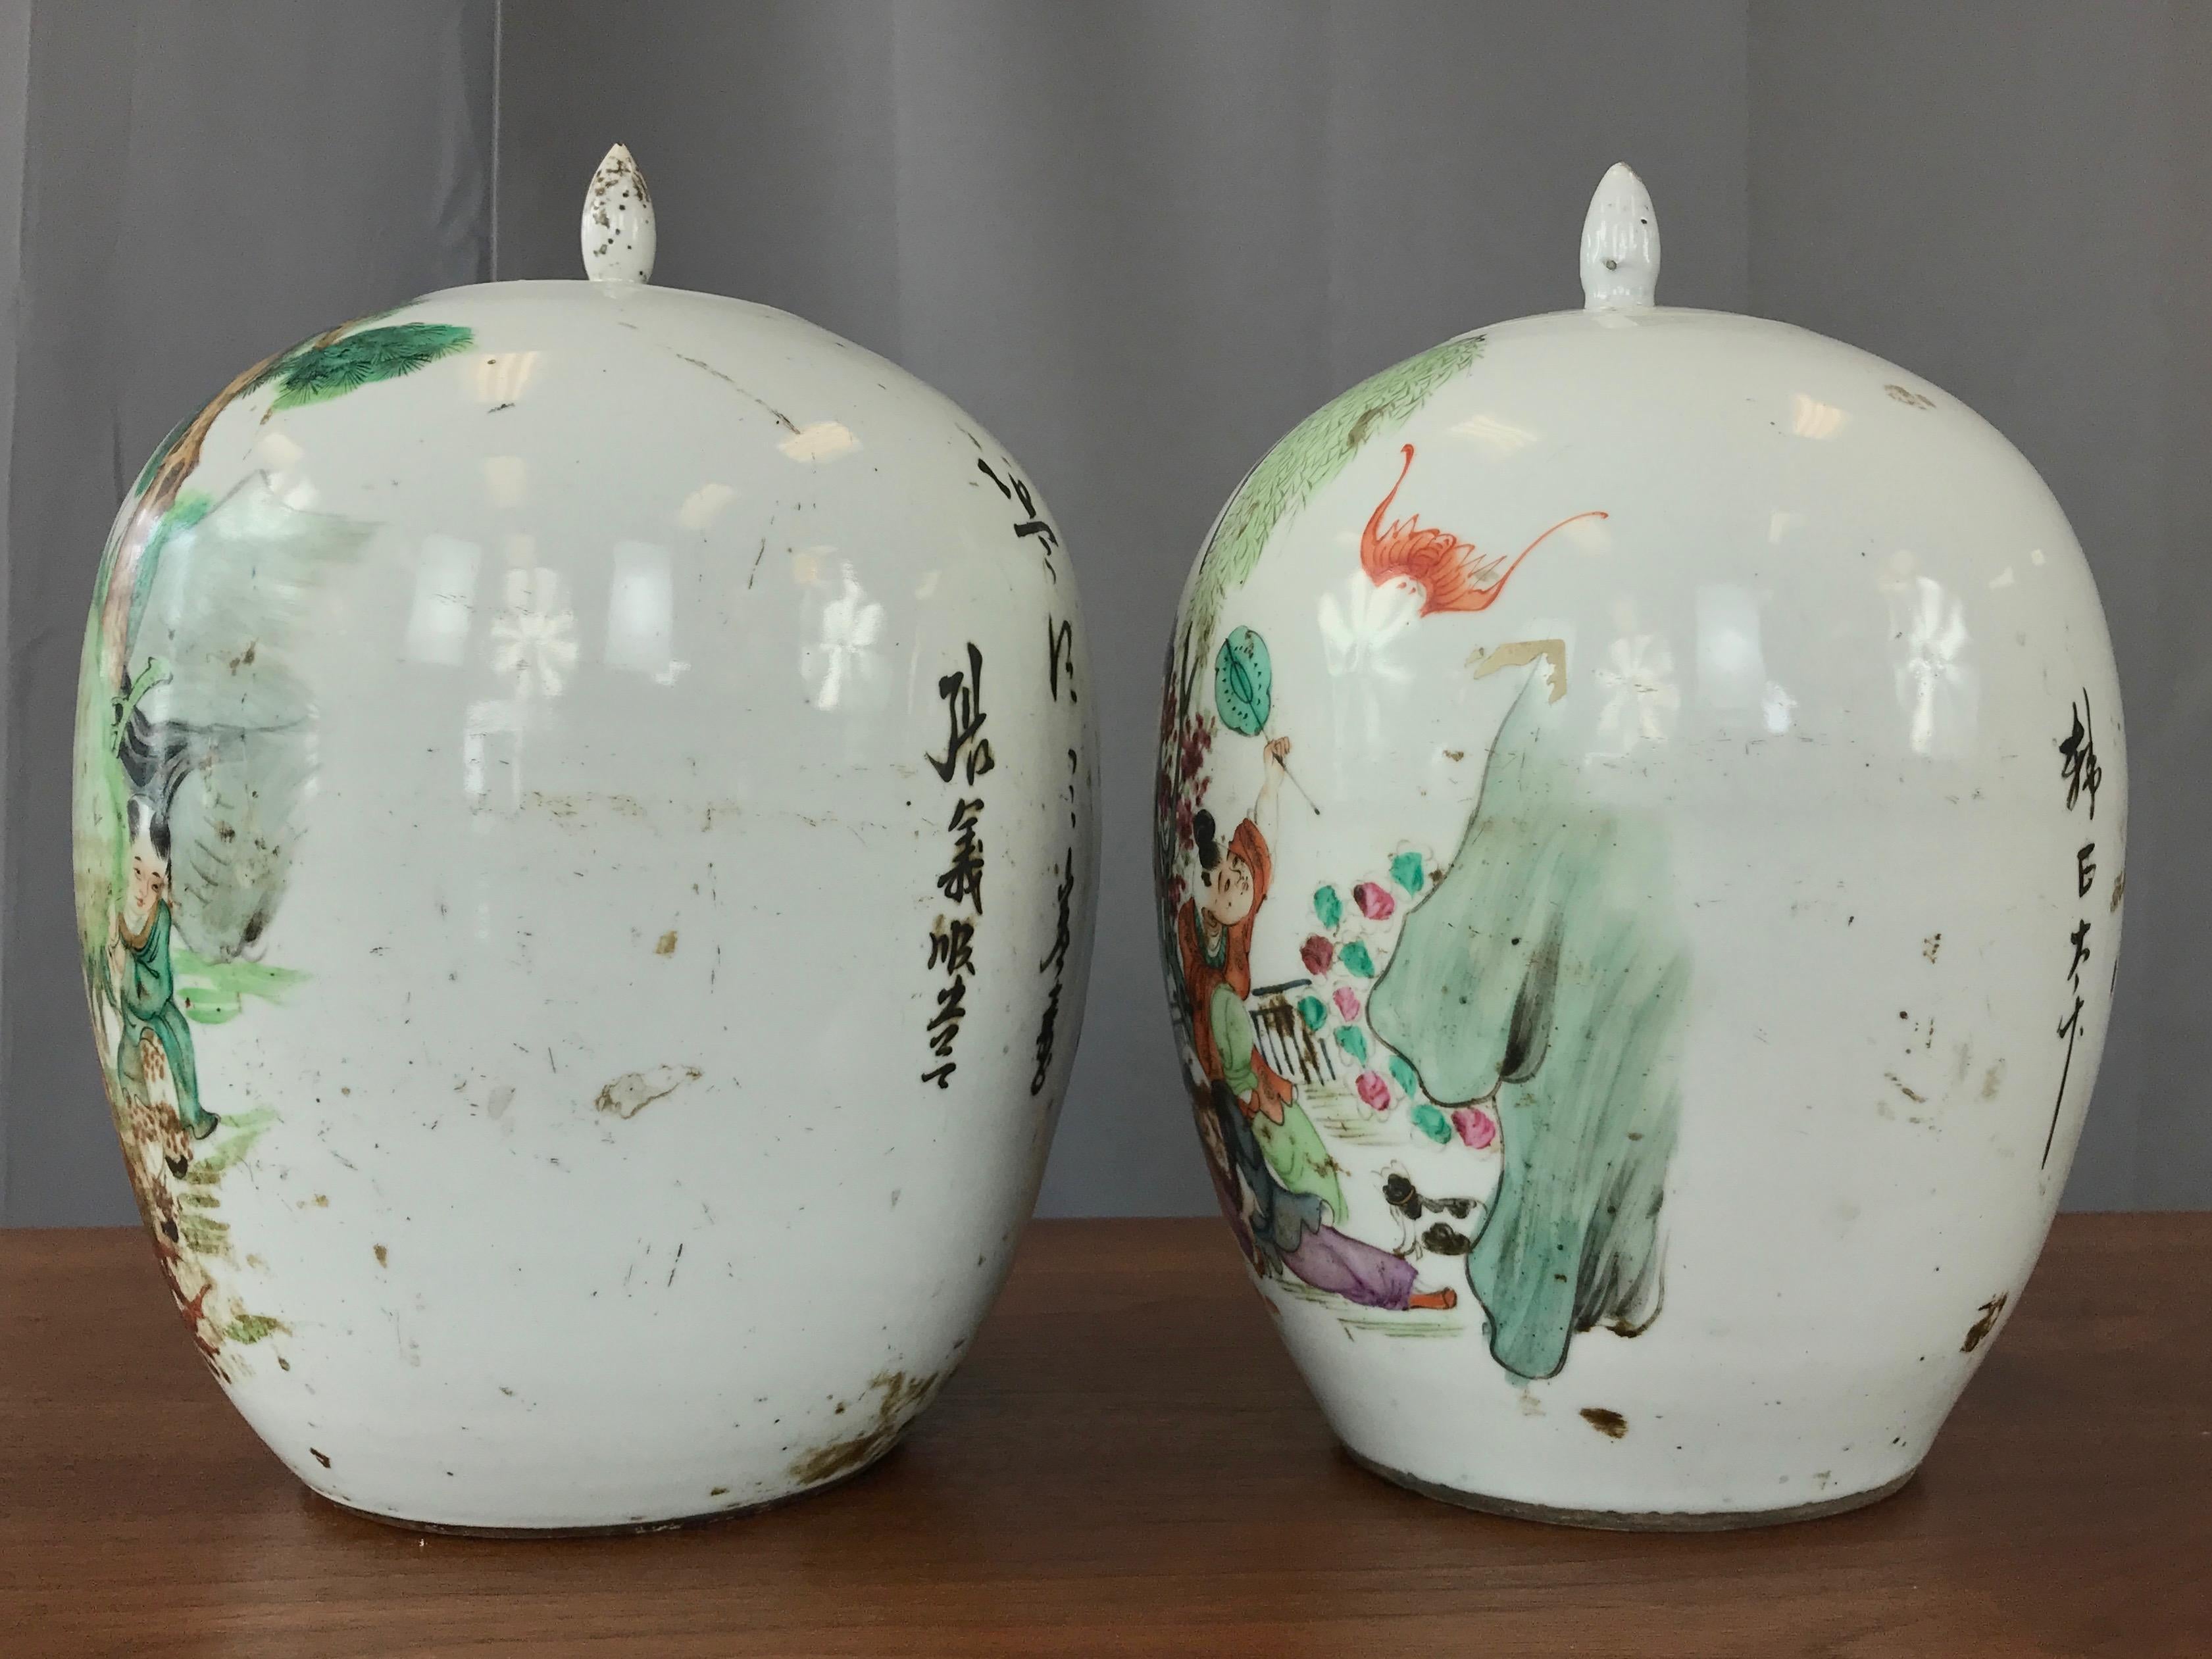 Glazed Pair of Large Chinese Famille Verte Porcelain Covered Vases, Late Qing Period